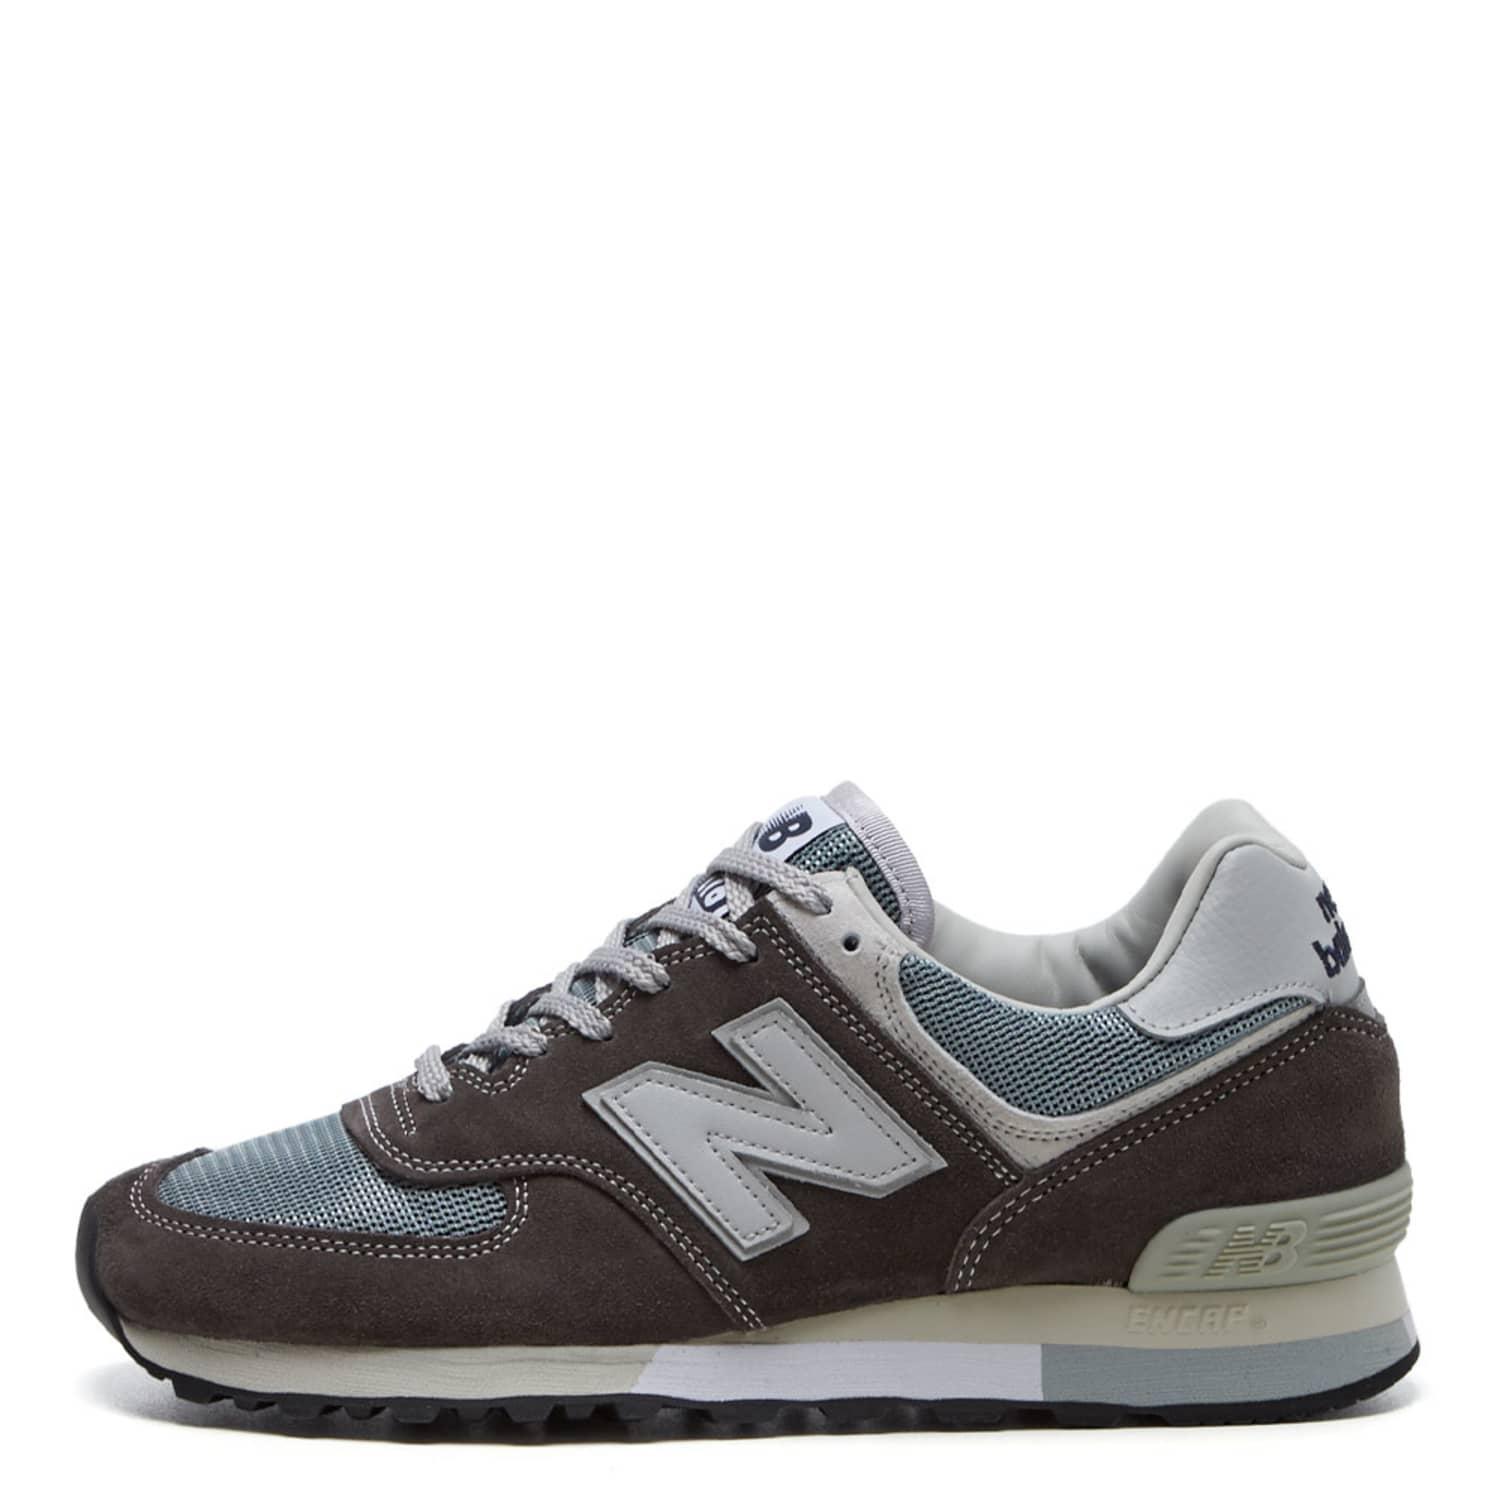 New Balance Elephant Skin 576 35th Anniversary Trainers in Brown